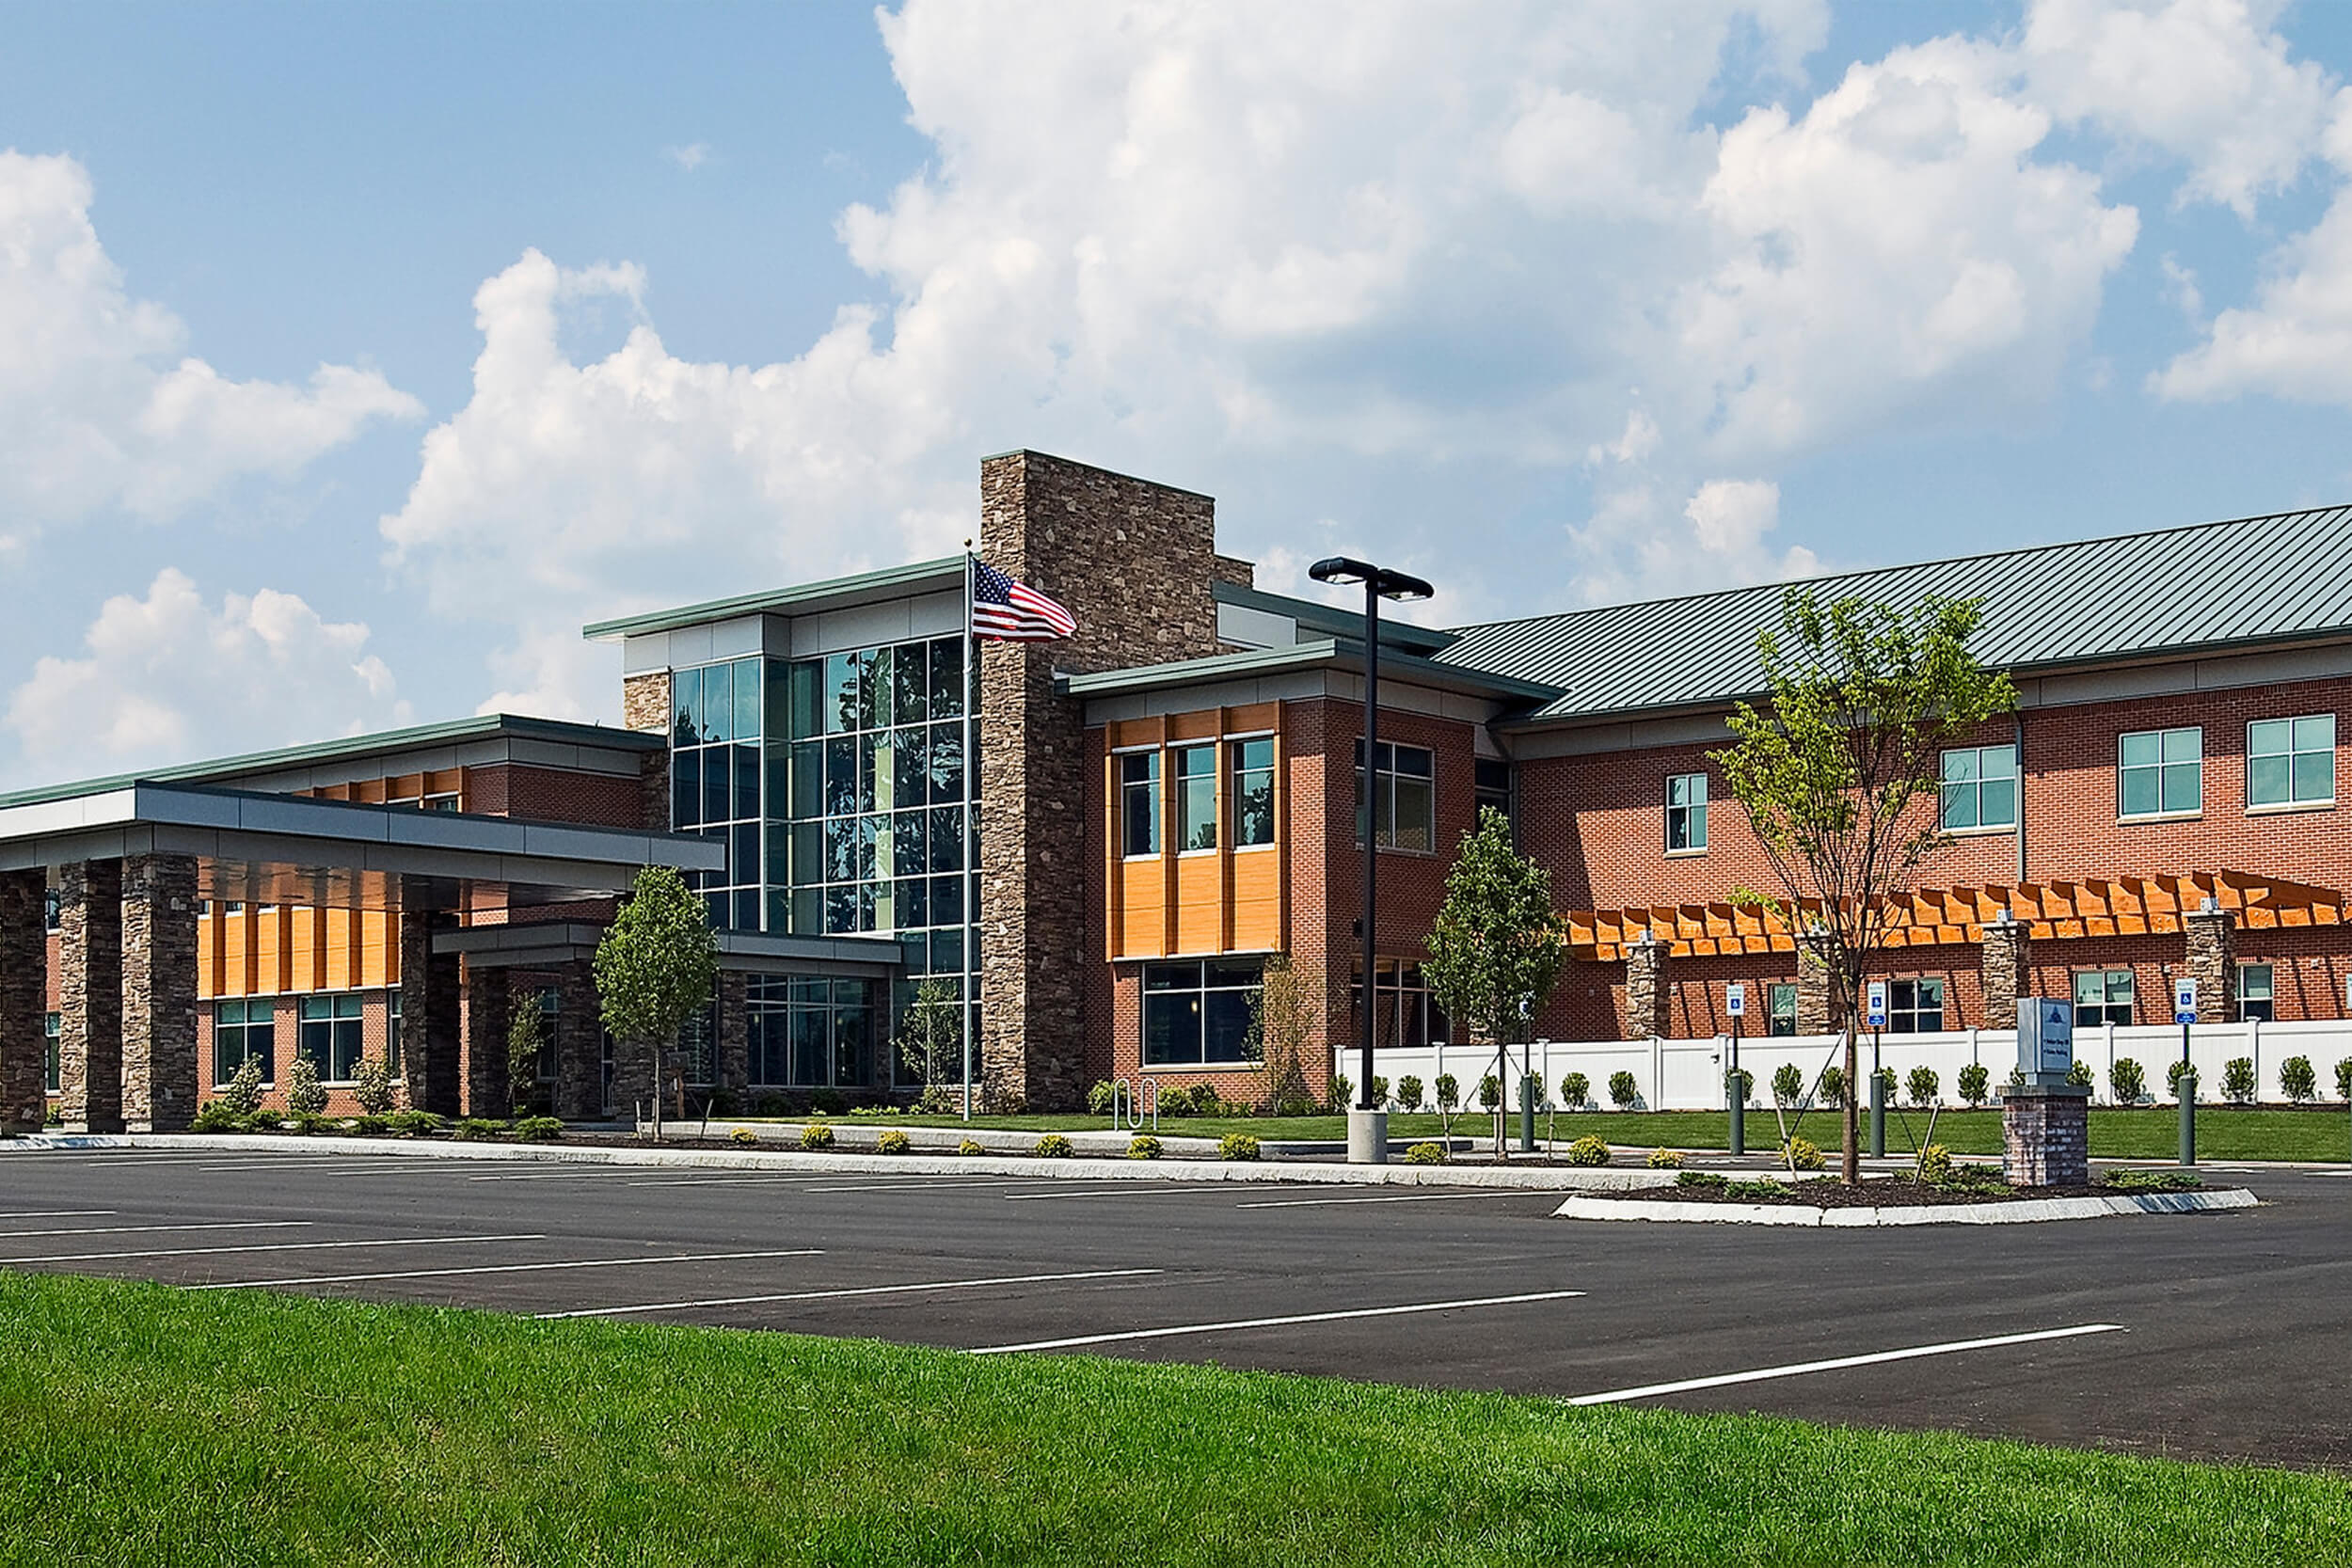 Exterior daytime view of a rehabilitation hospital facility. The building facade features dark brown siding with stone accents and large glass windows/walls.